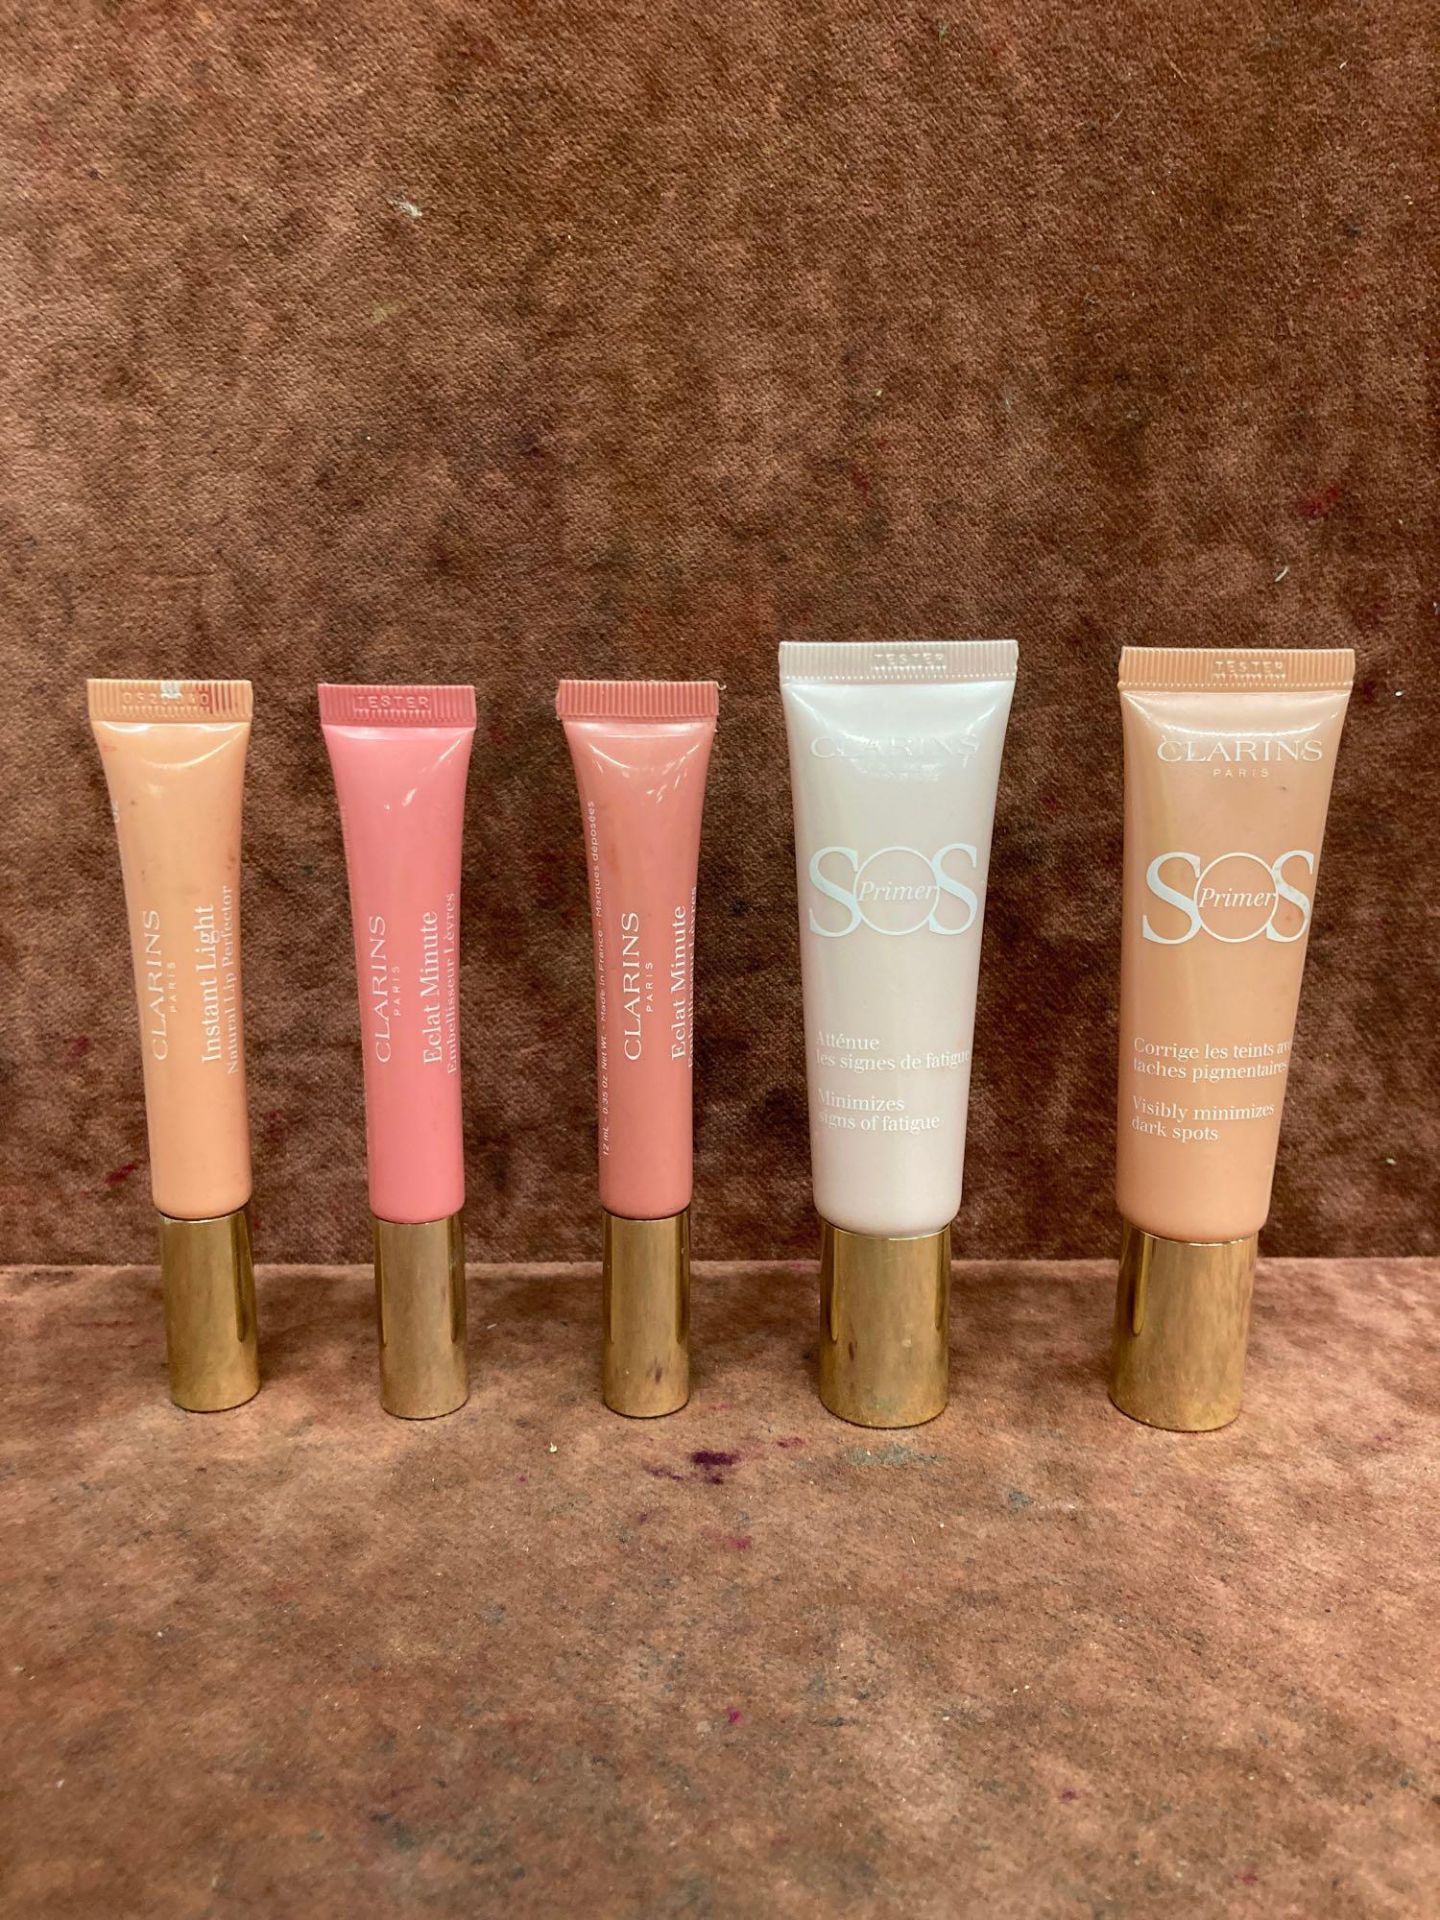 (Jb) RRP £210 Lot To Contain 3 Testers Of Clarins Natural Lip Perfectors And 5 Testers Of Clarins So